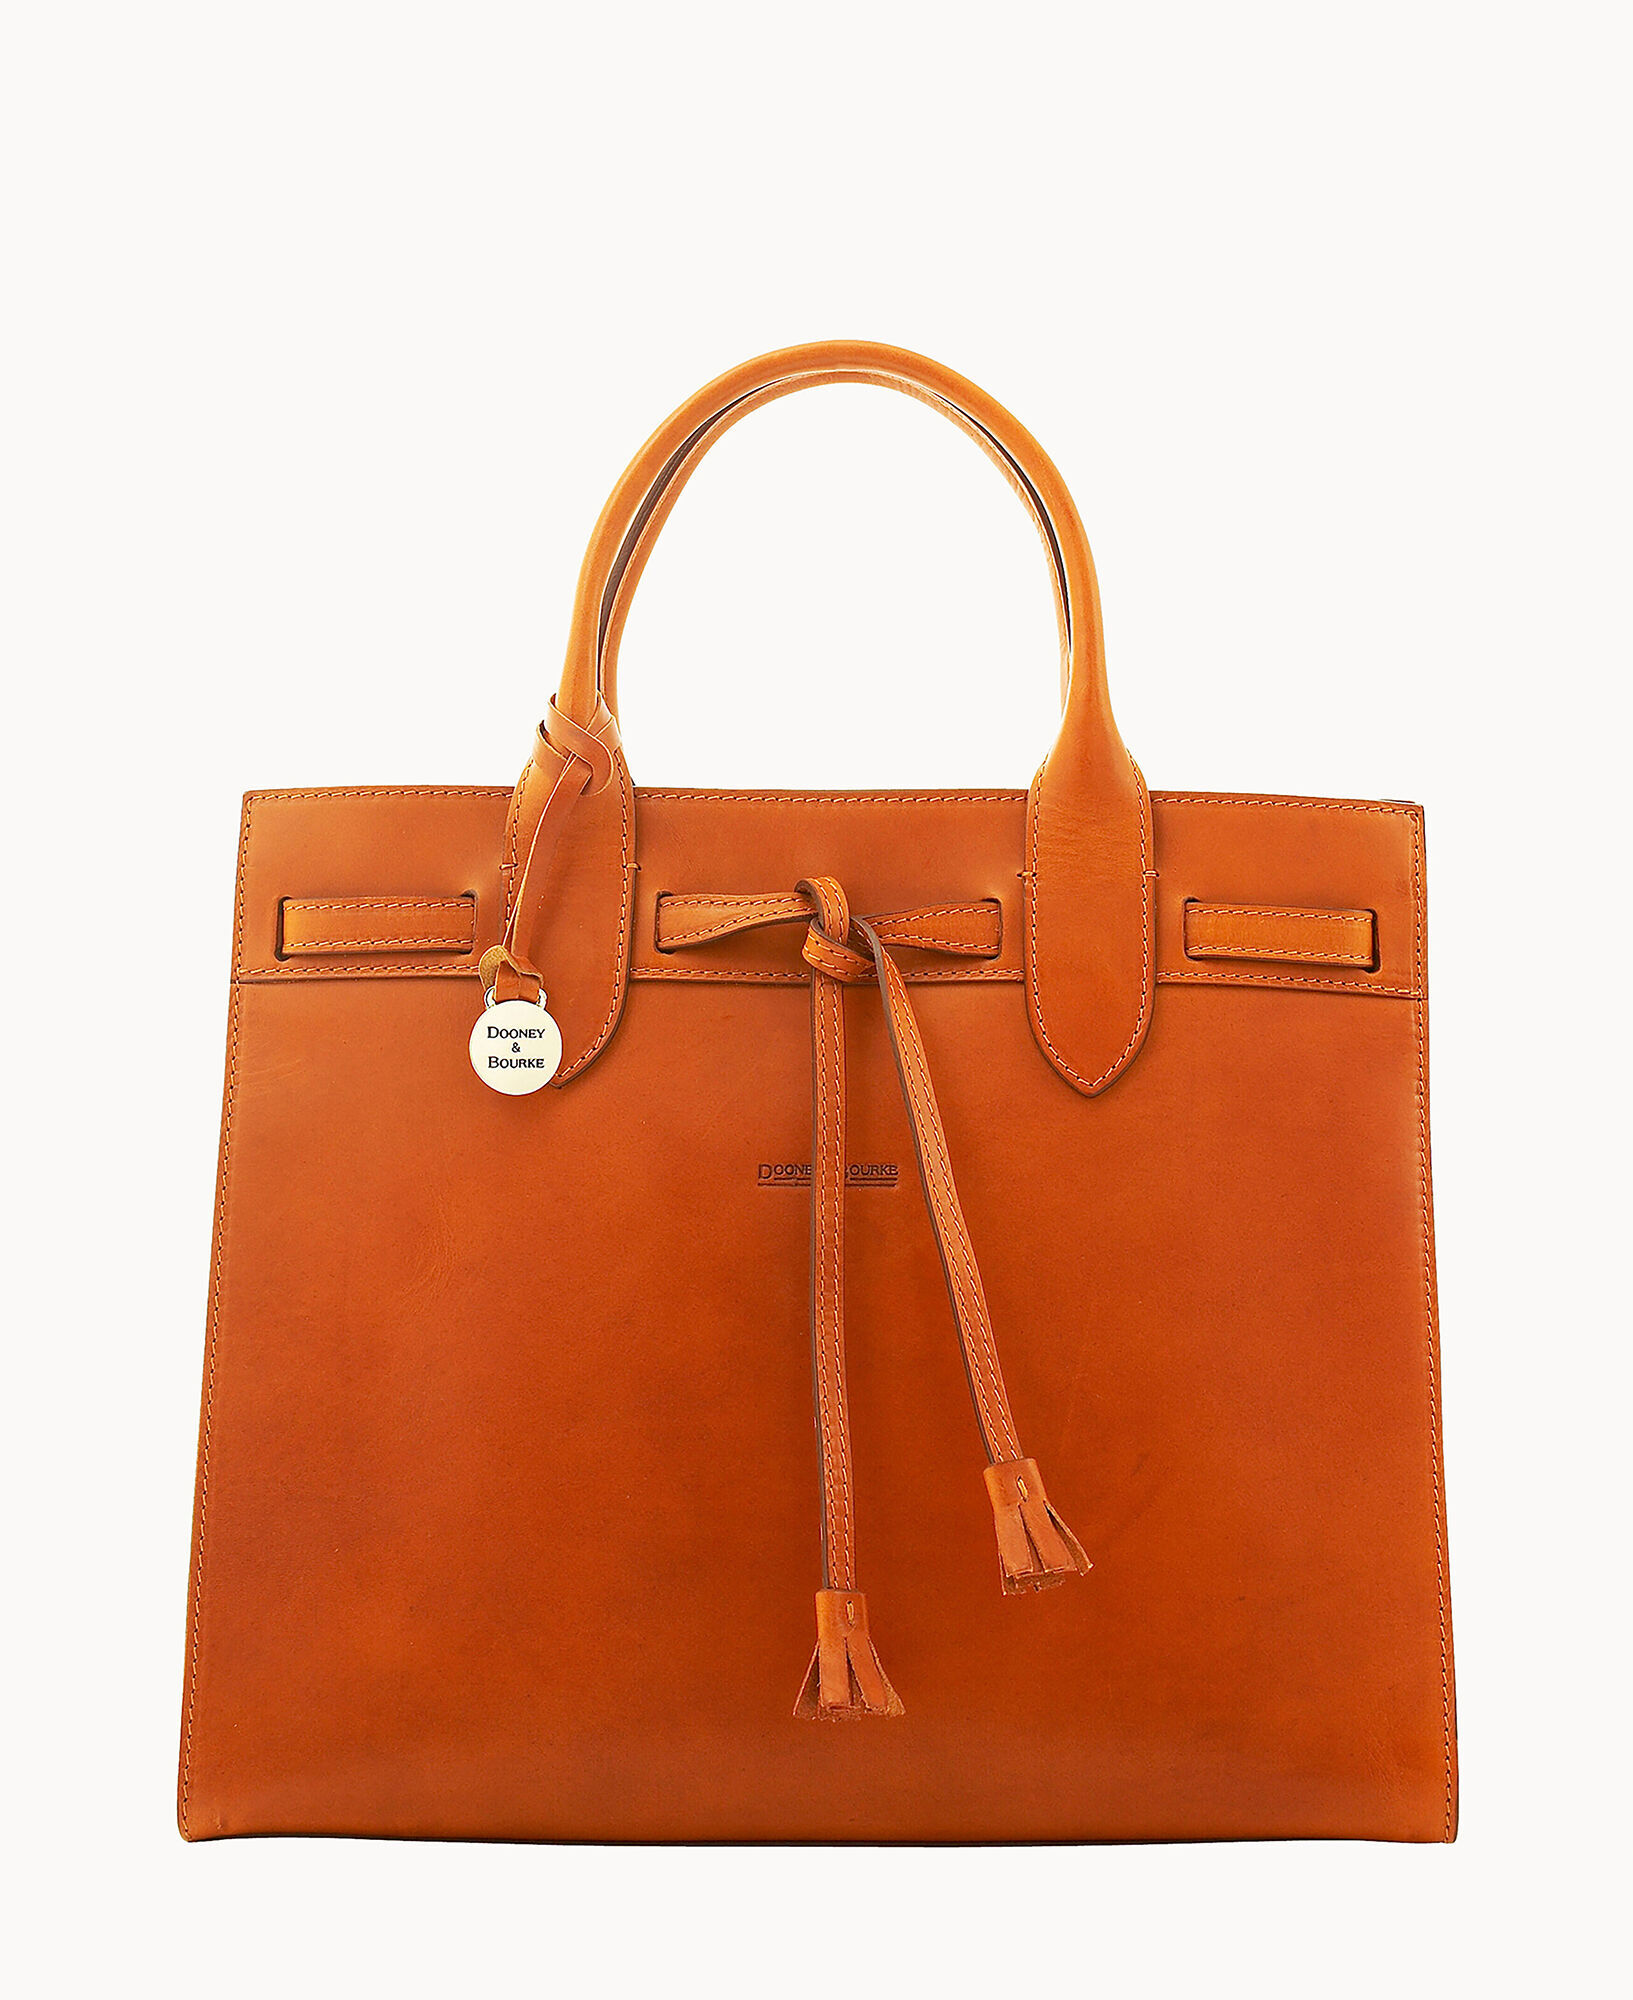 Catherine Satchel Ostrich Bag for an Elegant Outfit